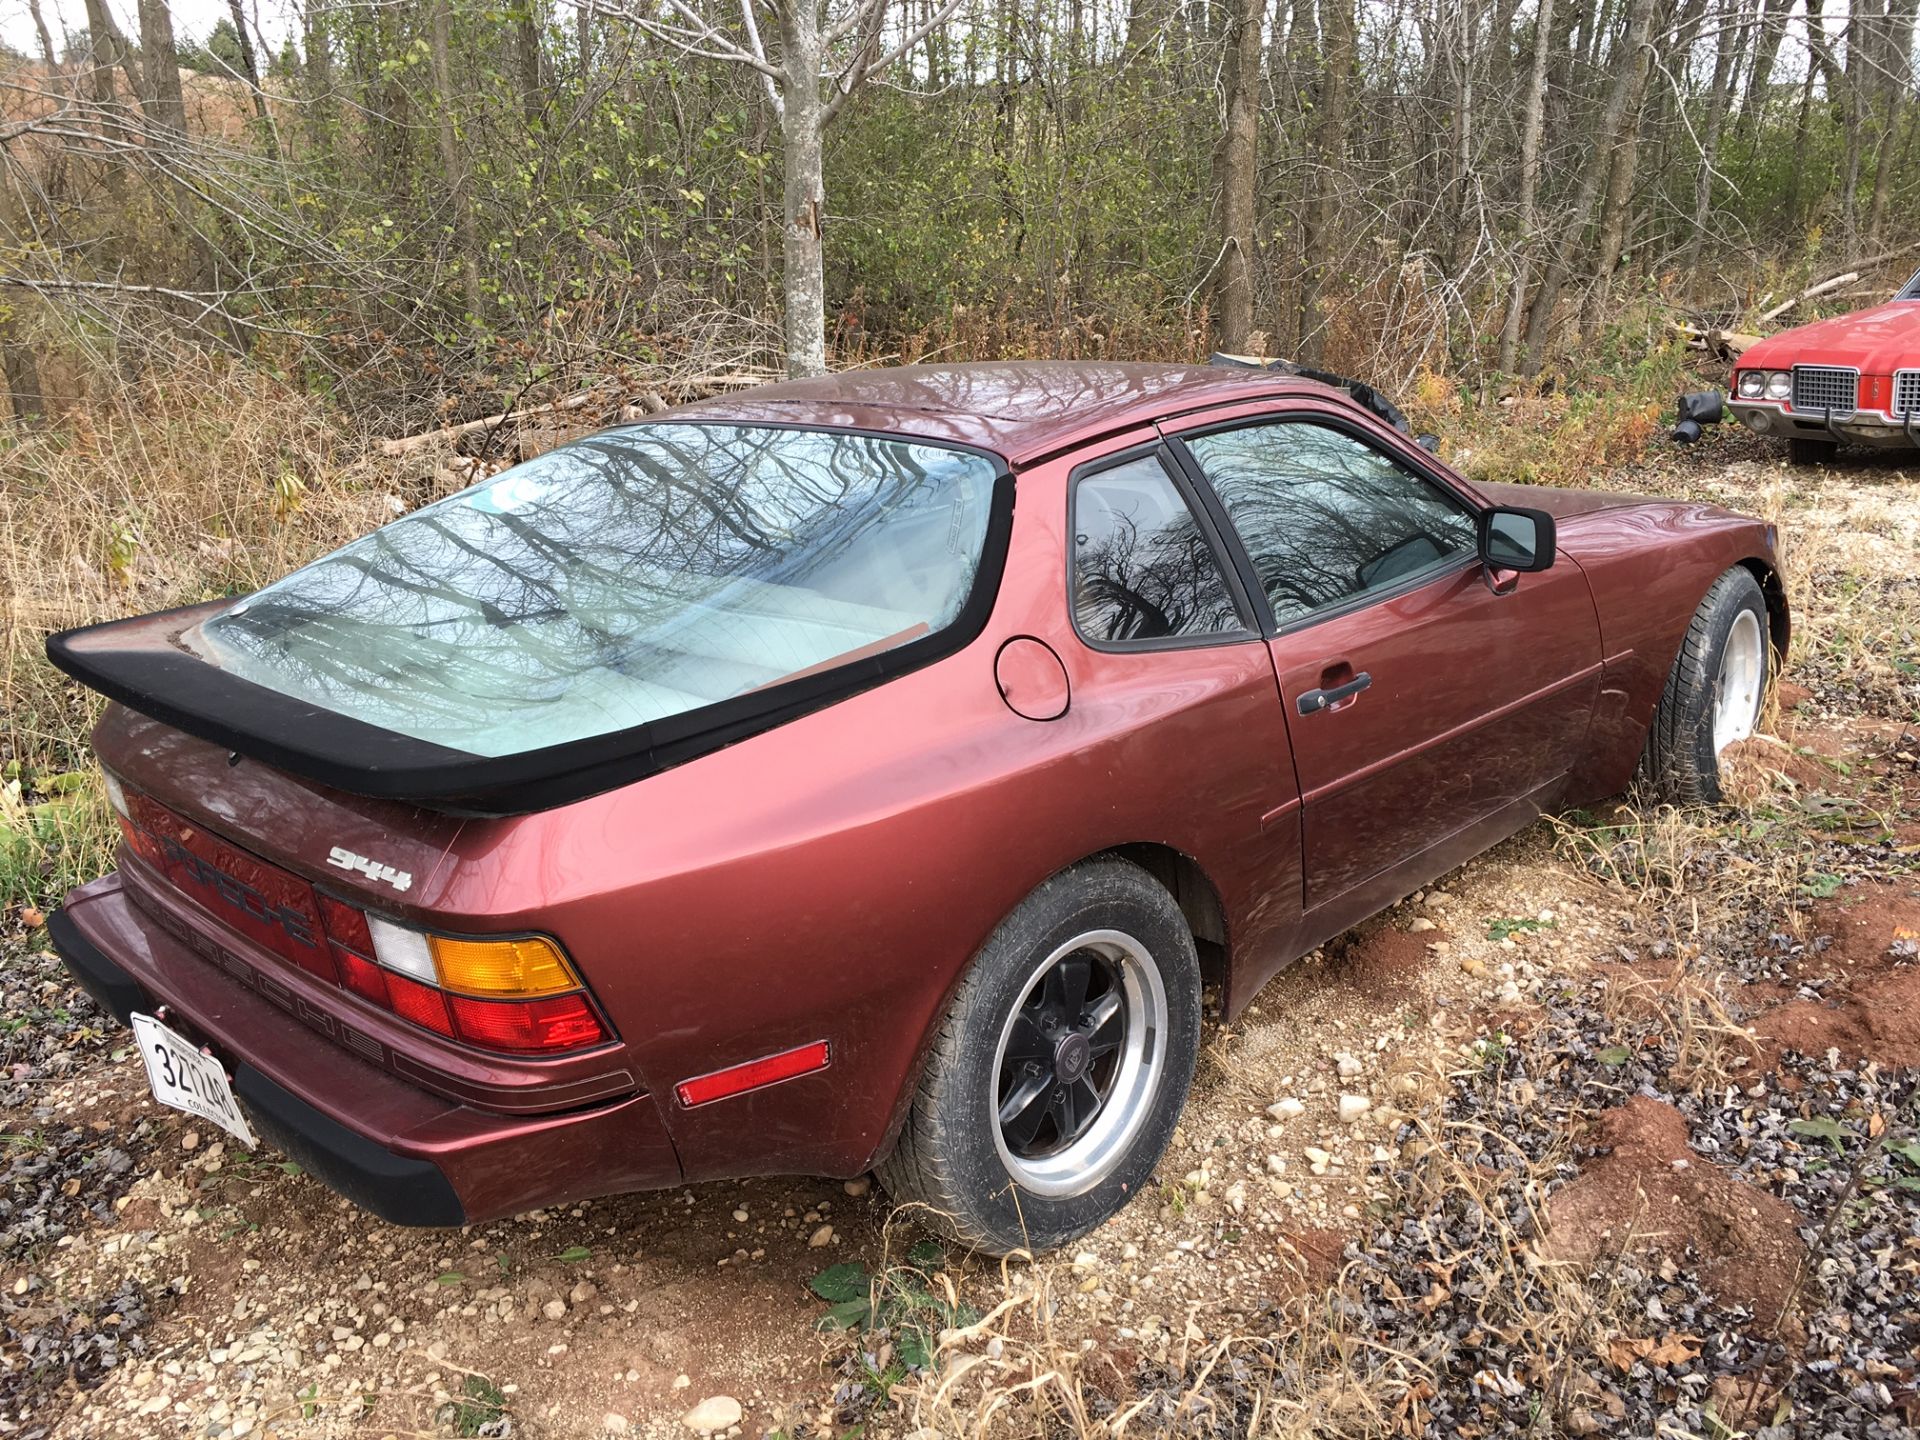 (1984) PORSCHE 944 VIN#: WP0AA0948EN461206; 5 SPEED MANUAL TRANSMISSION, RUNNING CONDITION - Image 4 of 12